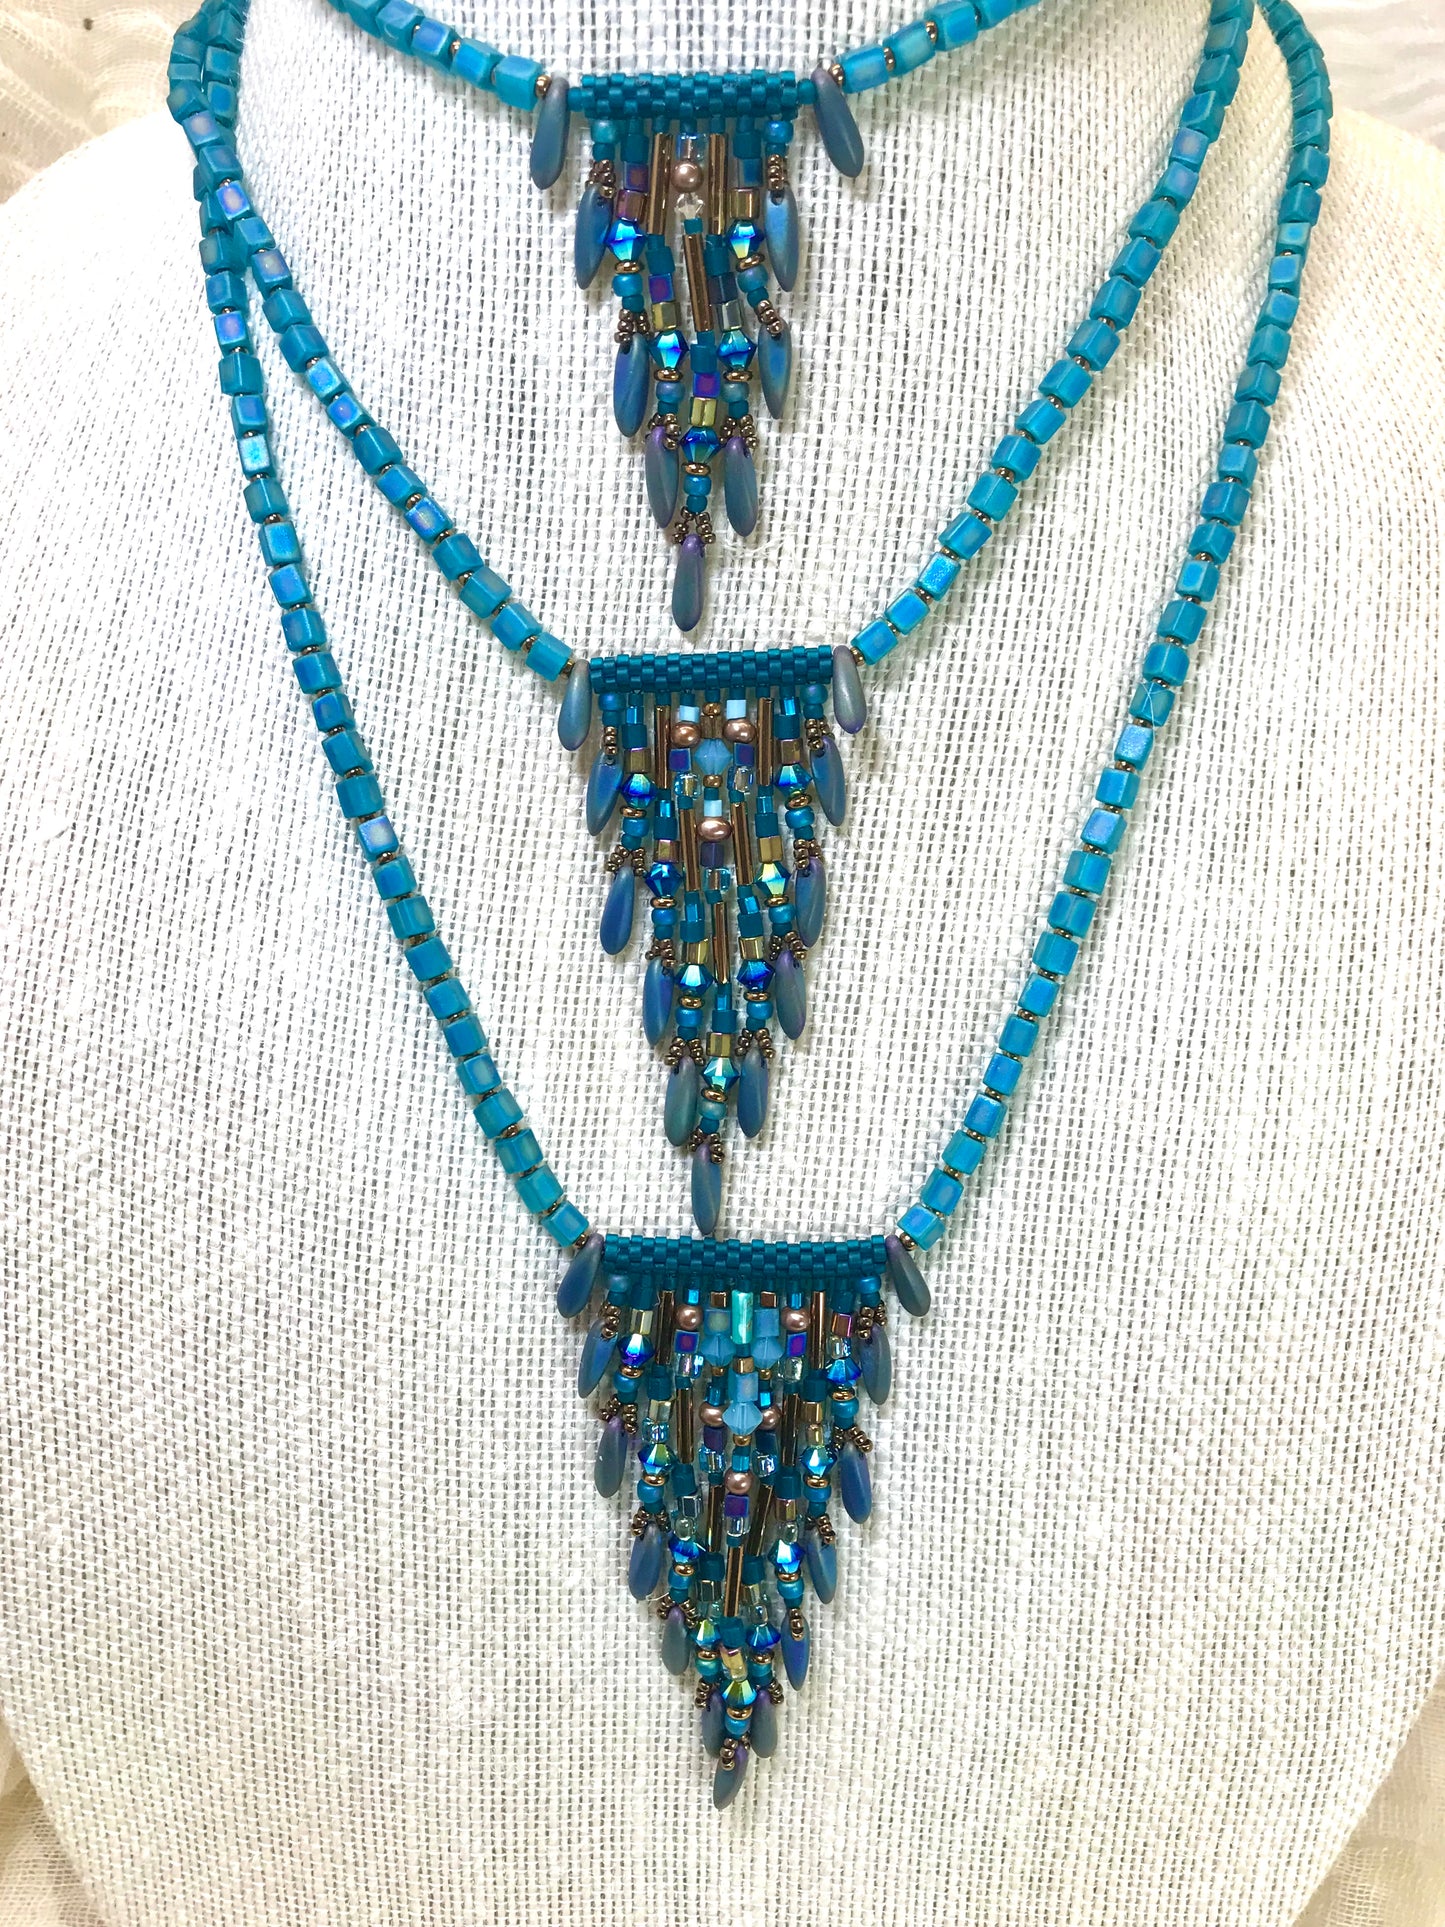 Fringy Teal Necklace 9 strands